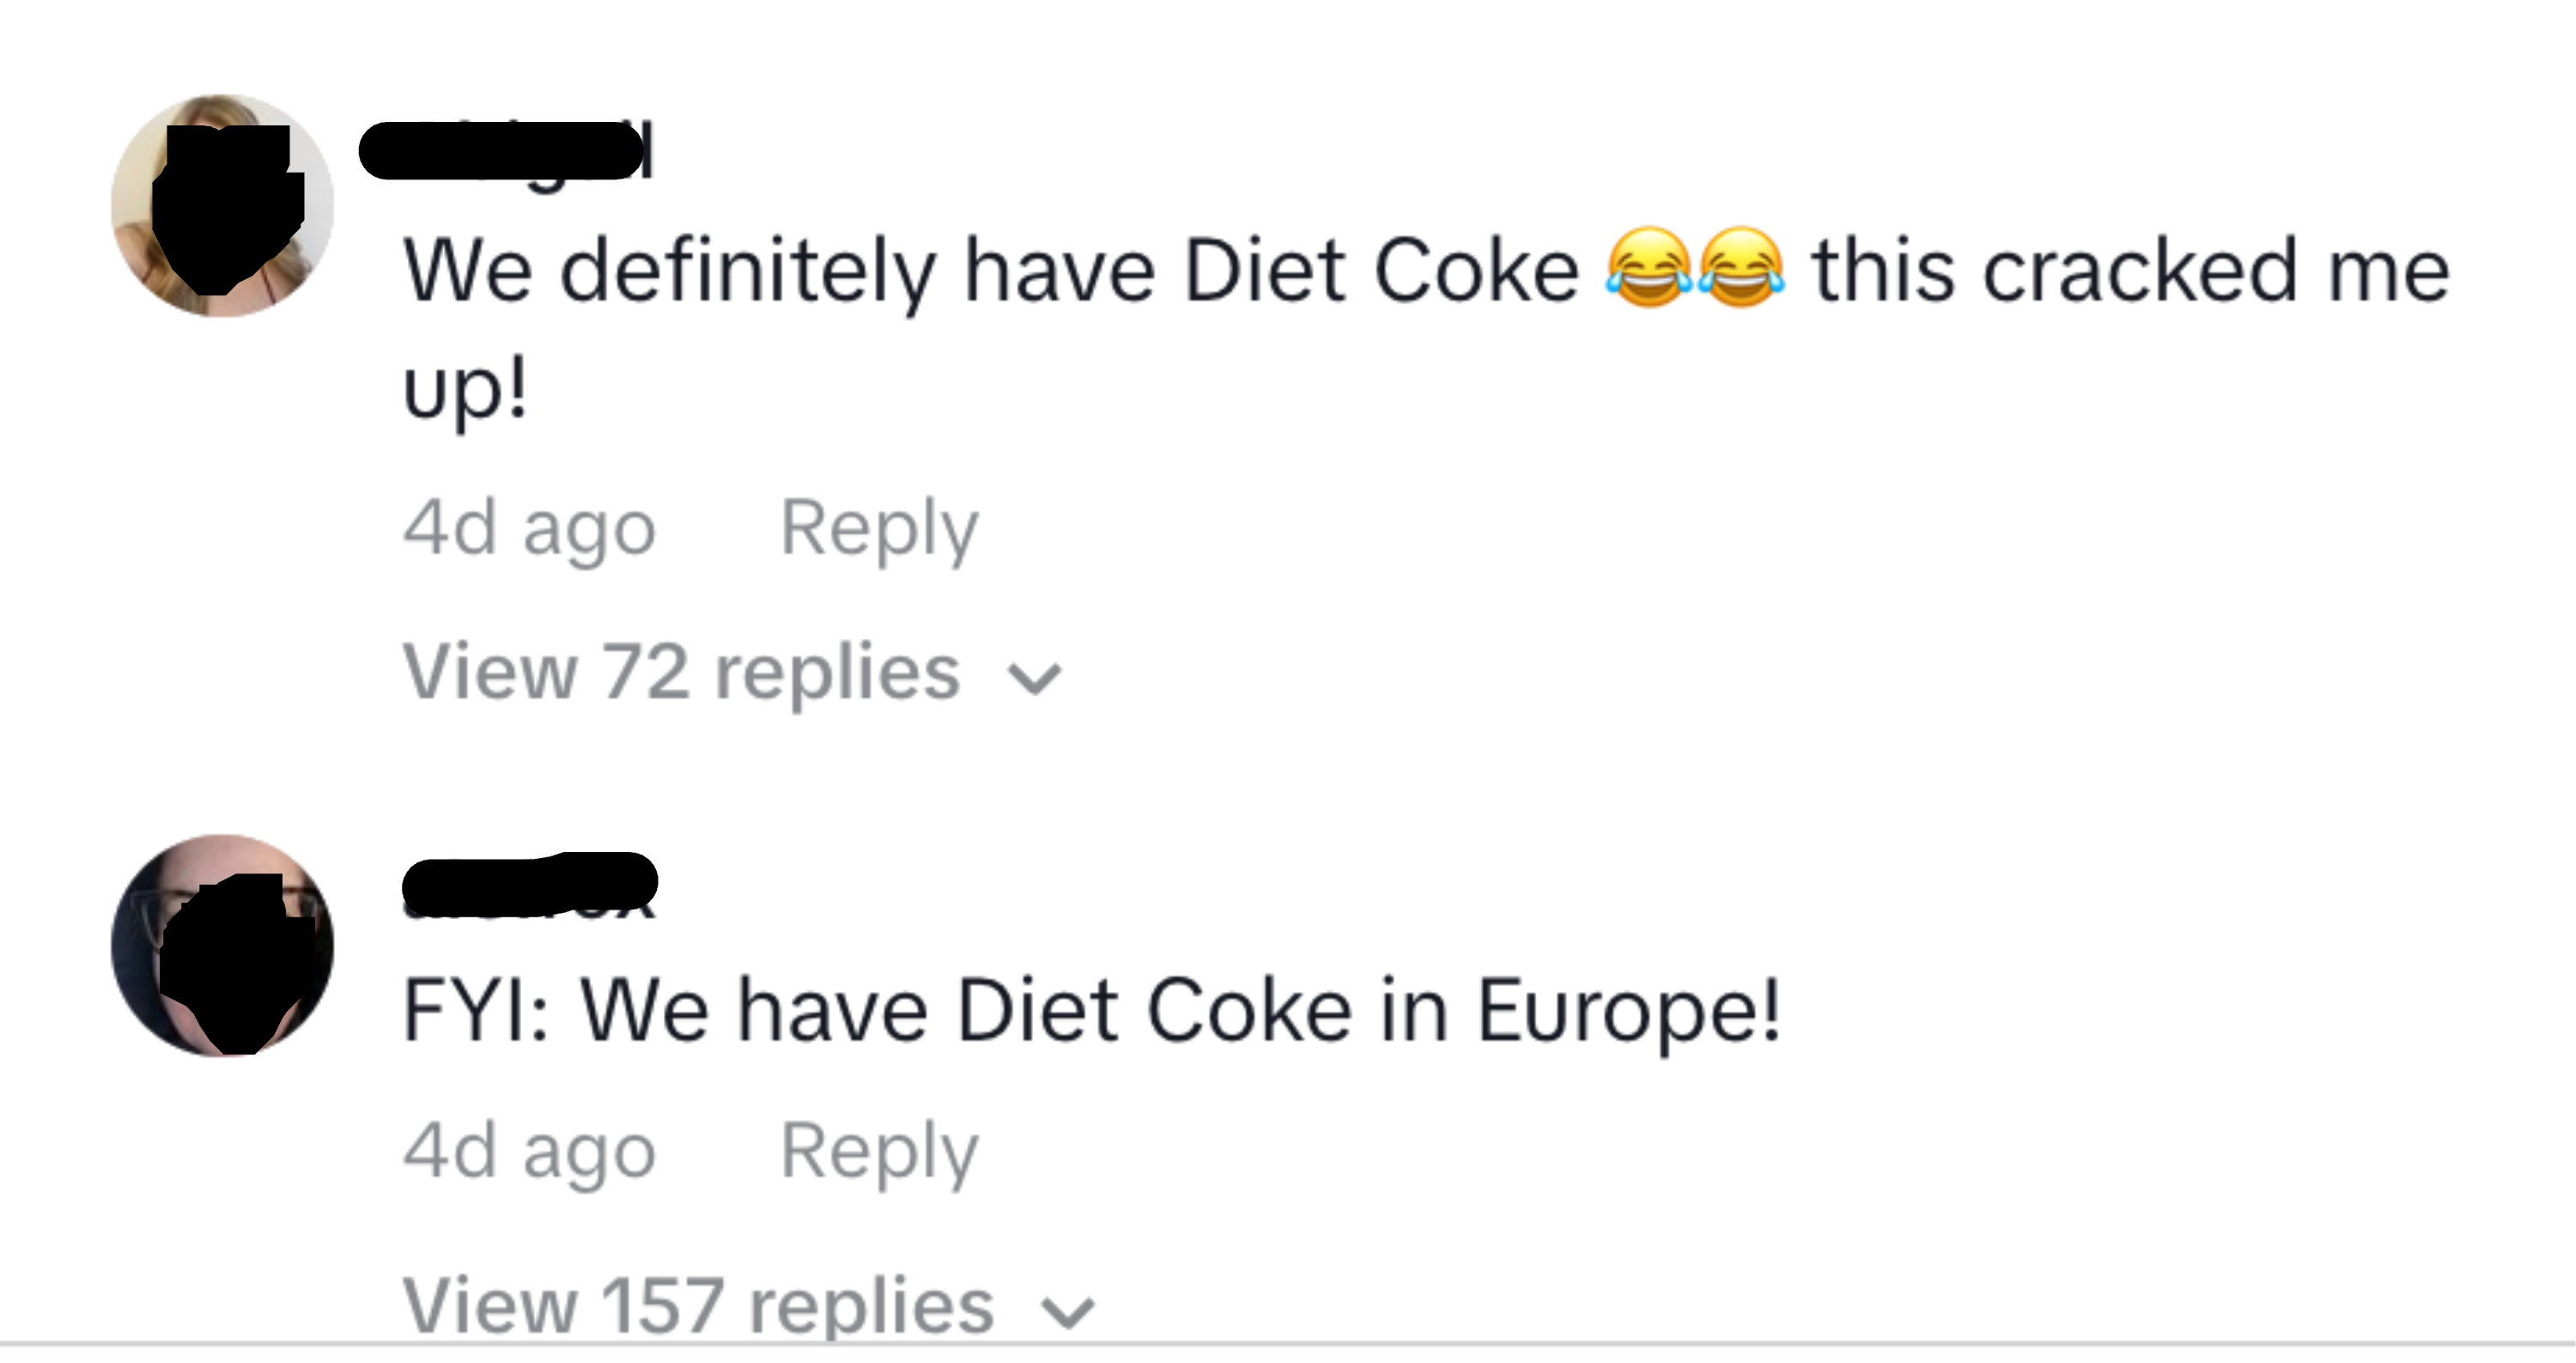 One person said, &quot;FYI: We have Diet Coke in Europe!&quot;